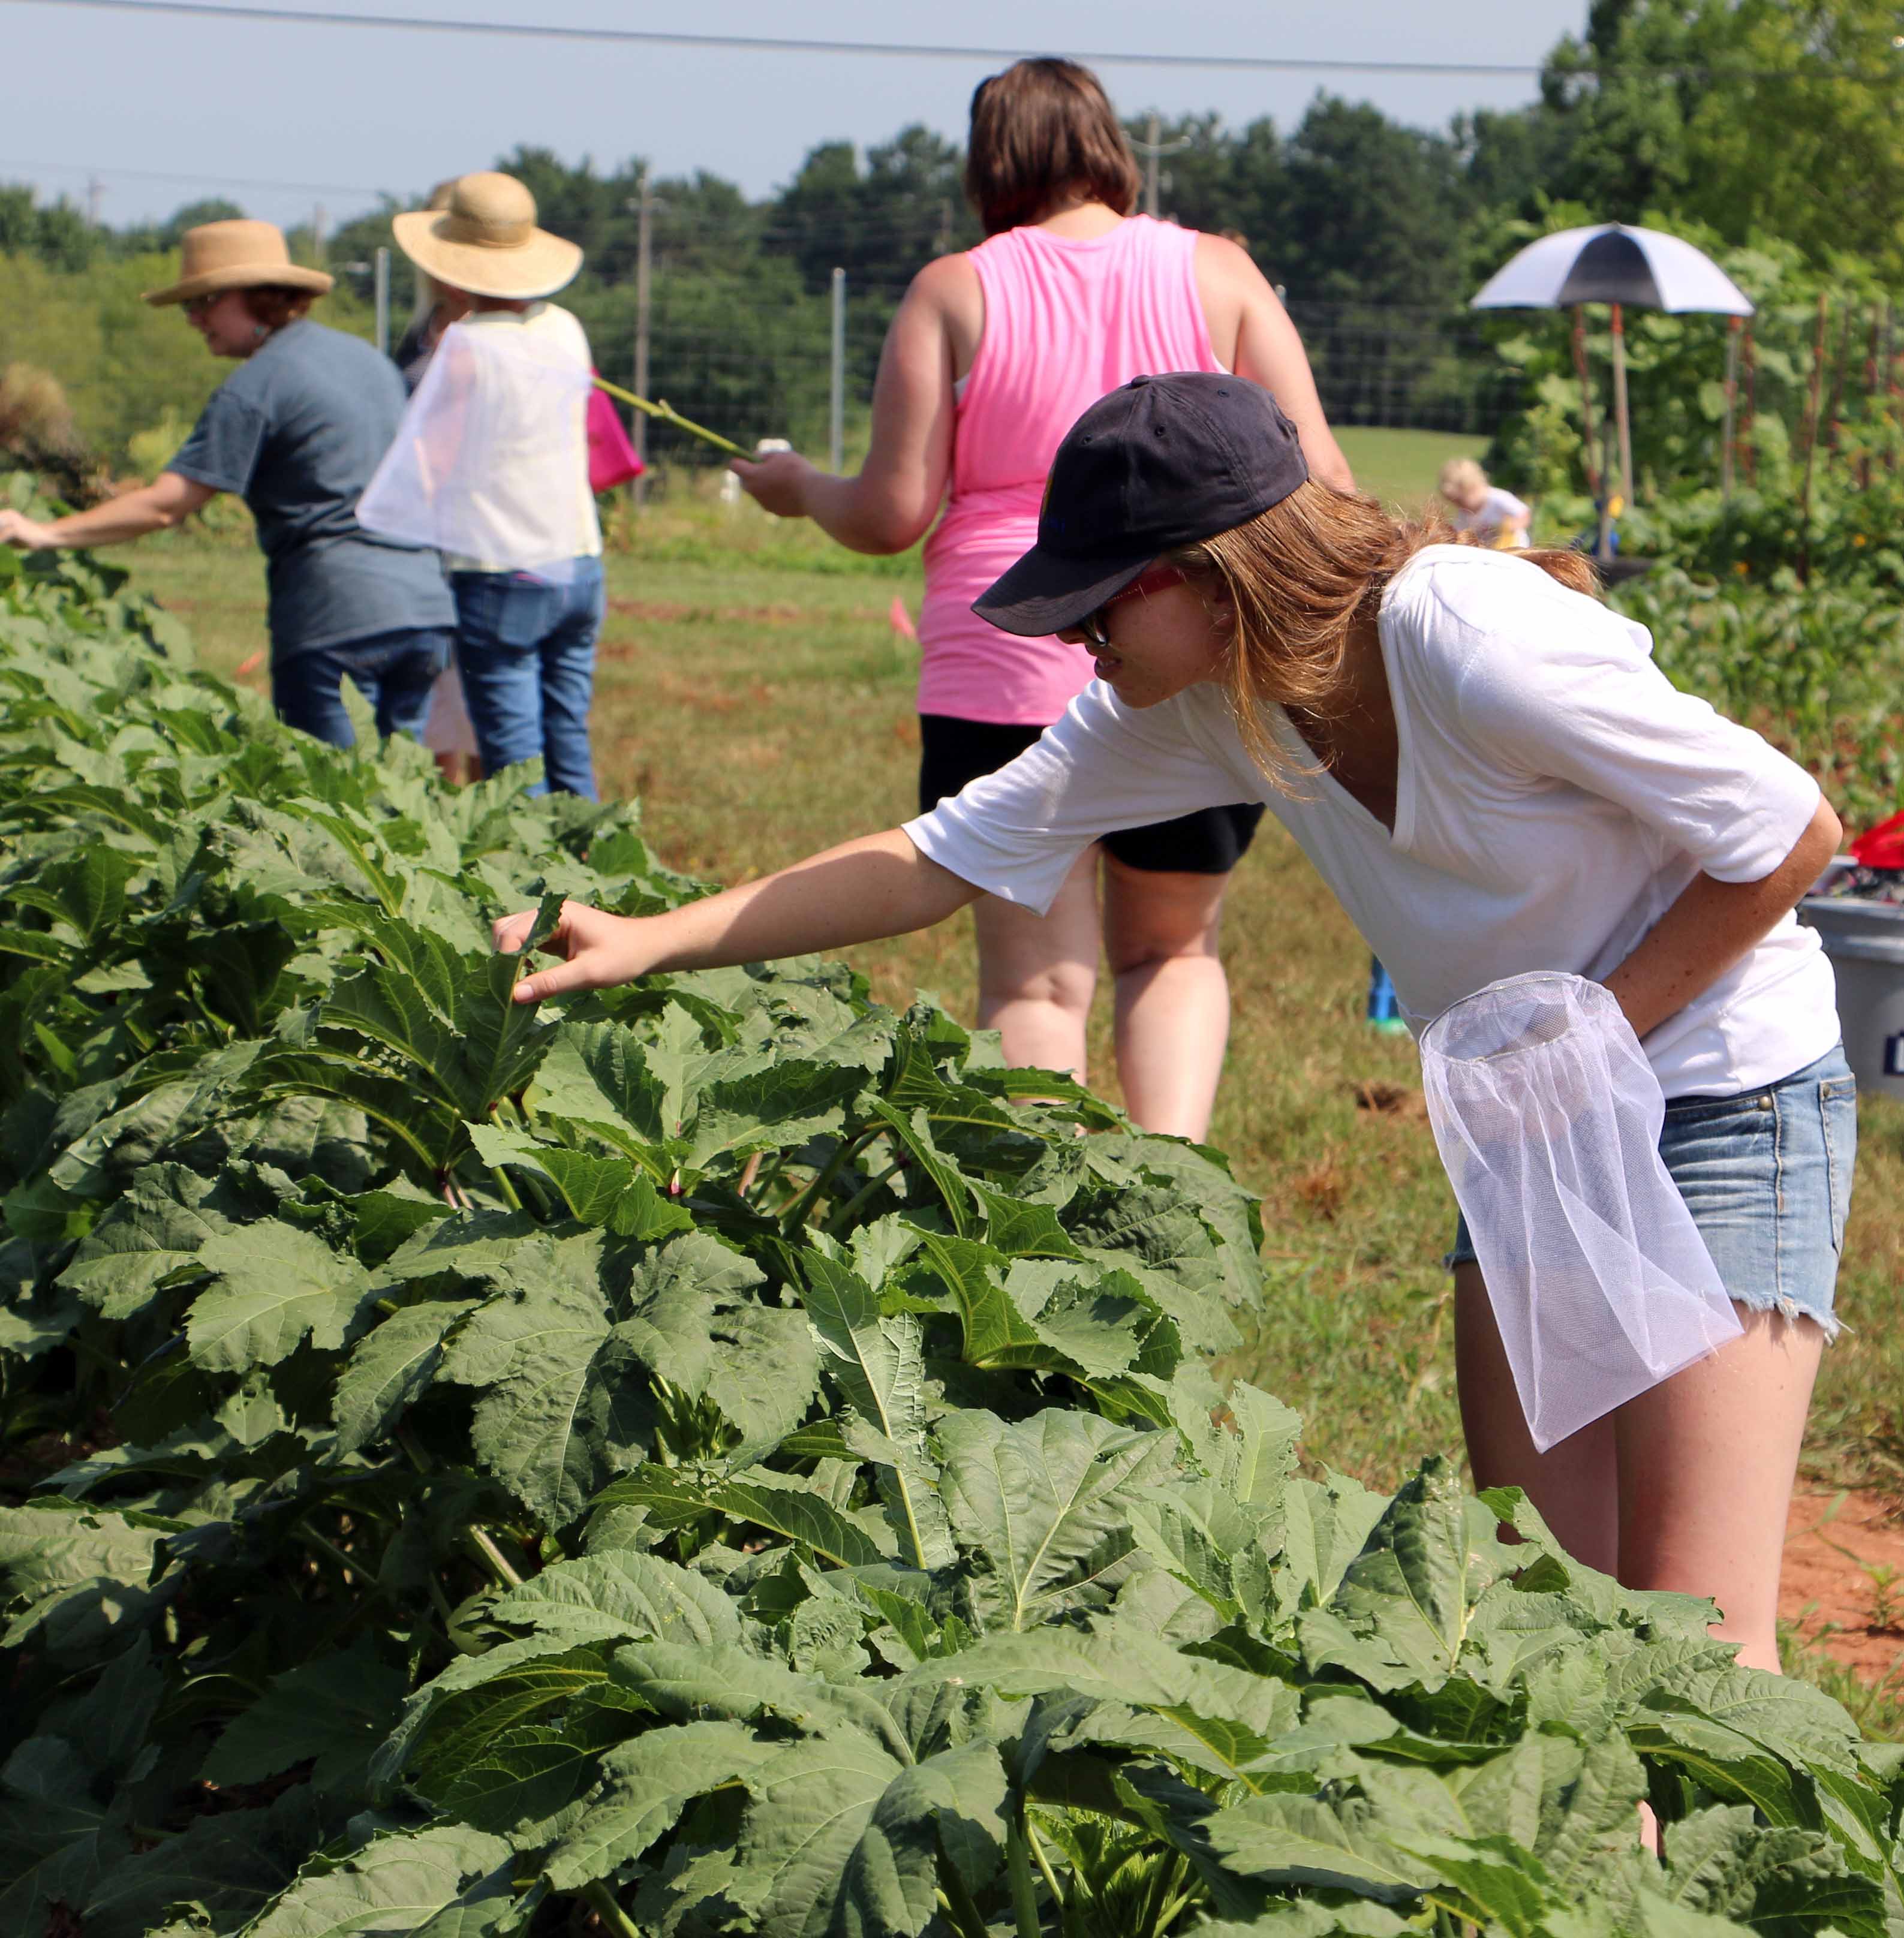 For the third consecutive summer, Georgia teachers have joined with UGA Extension for school garden trainings.